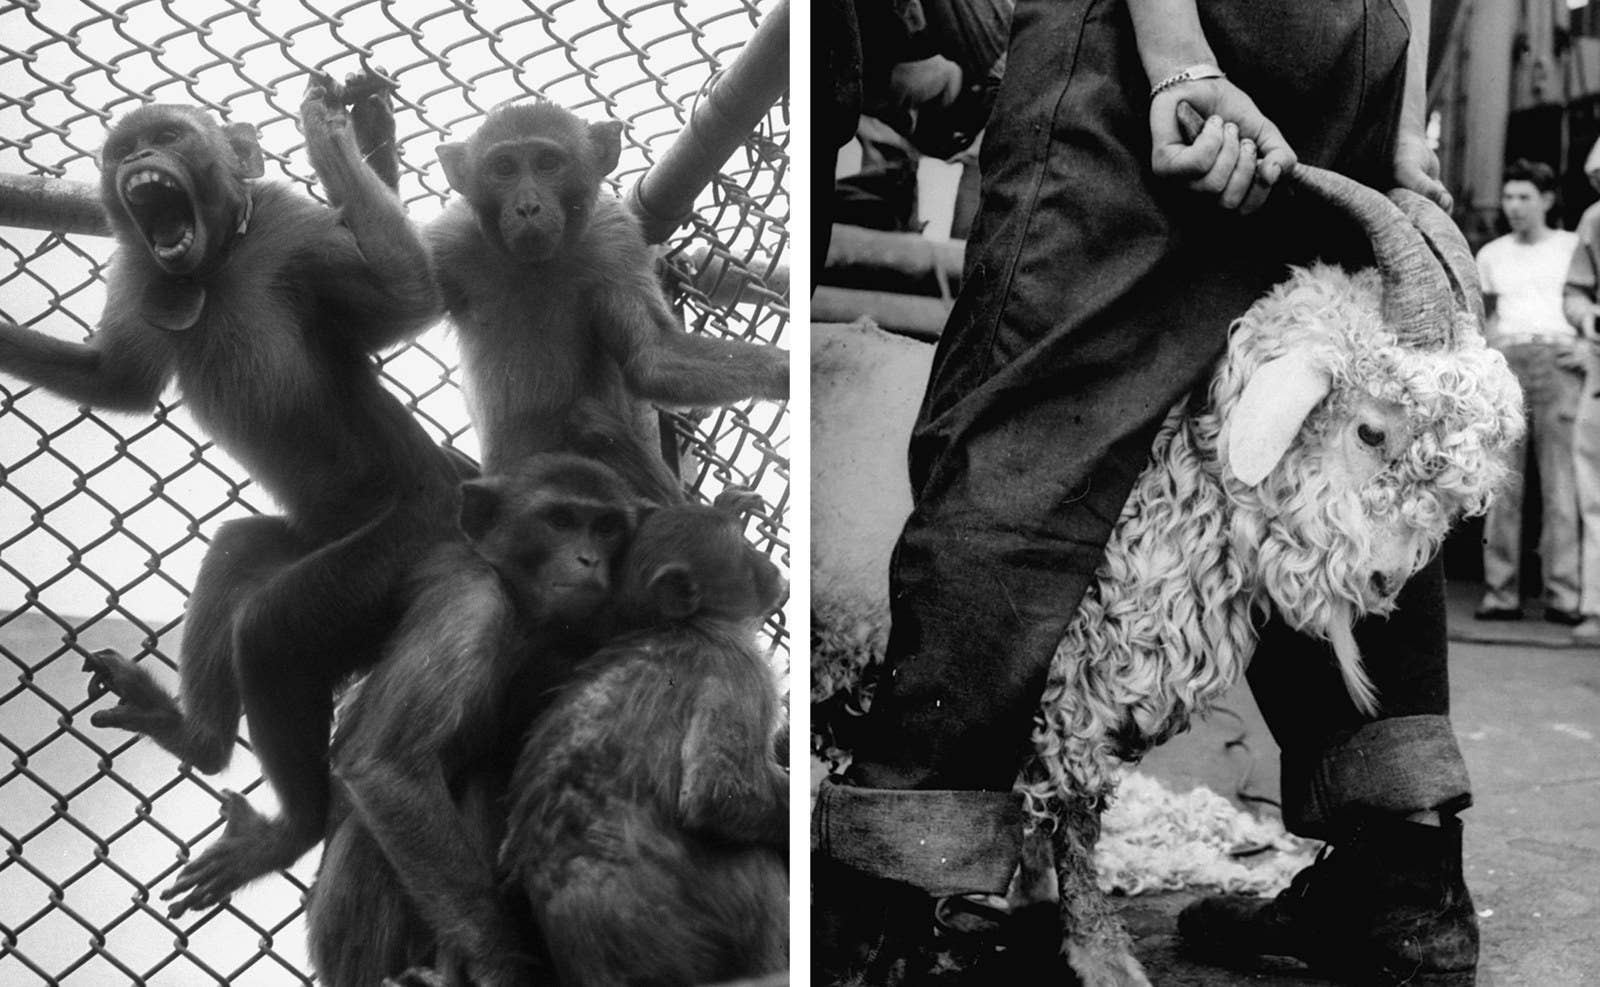 Left: Caged monkeys are test subjects during the Bikini atom bomb tests in 1946. Right: A government employee shears a goat before an atomic bomb test in 1946.